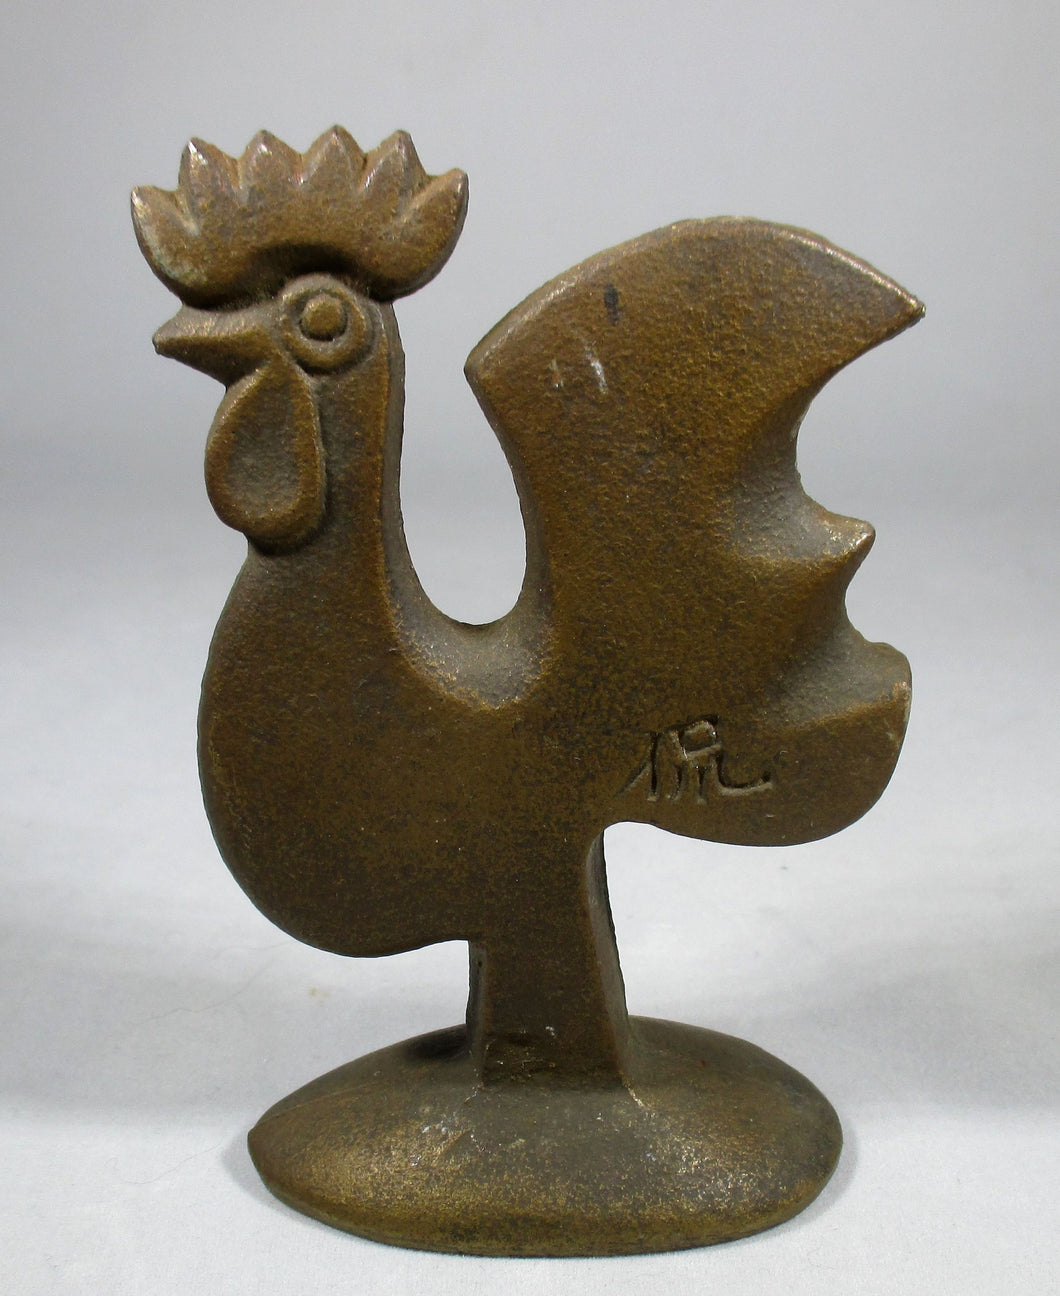 SALE - Japanese Niwatori - Bronze paper weight Rooster